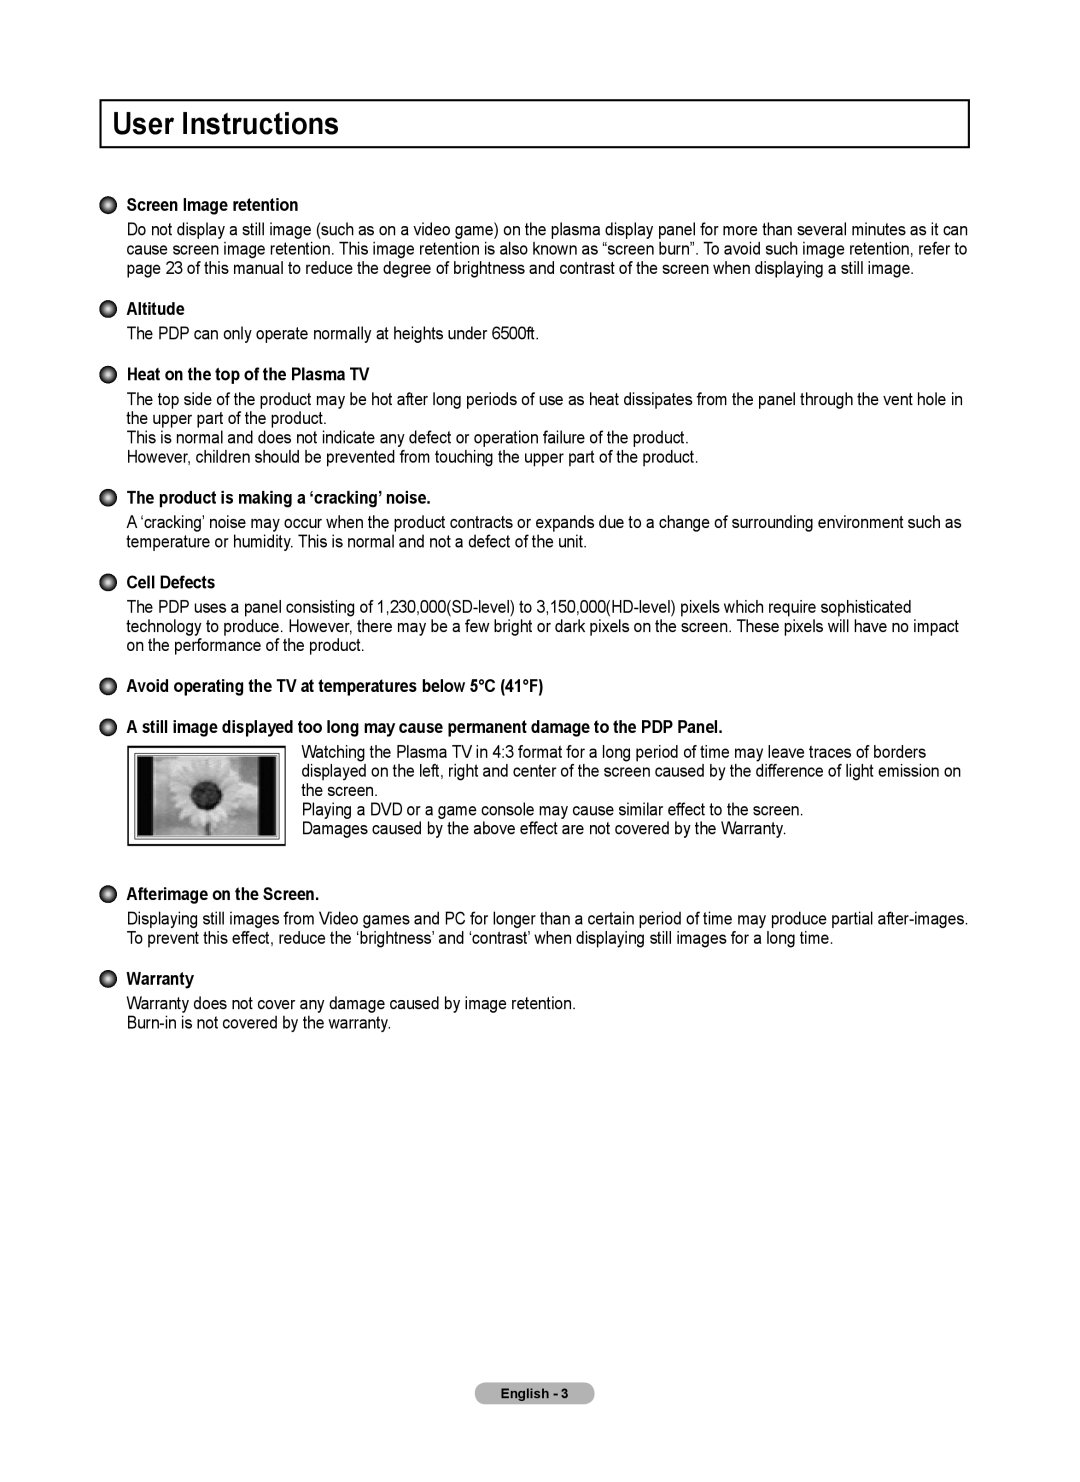 Samsung 460 User Instructions, Screen Image retention, Altitude, Heat on the top of the Plasma TV, Cell Defects, Warranty 